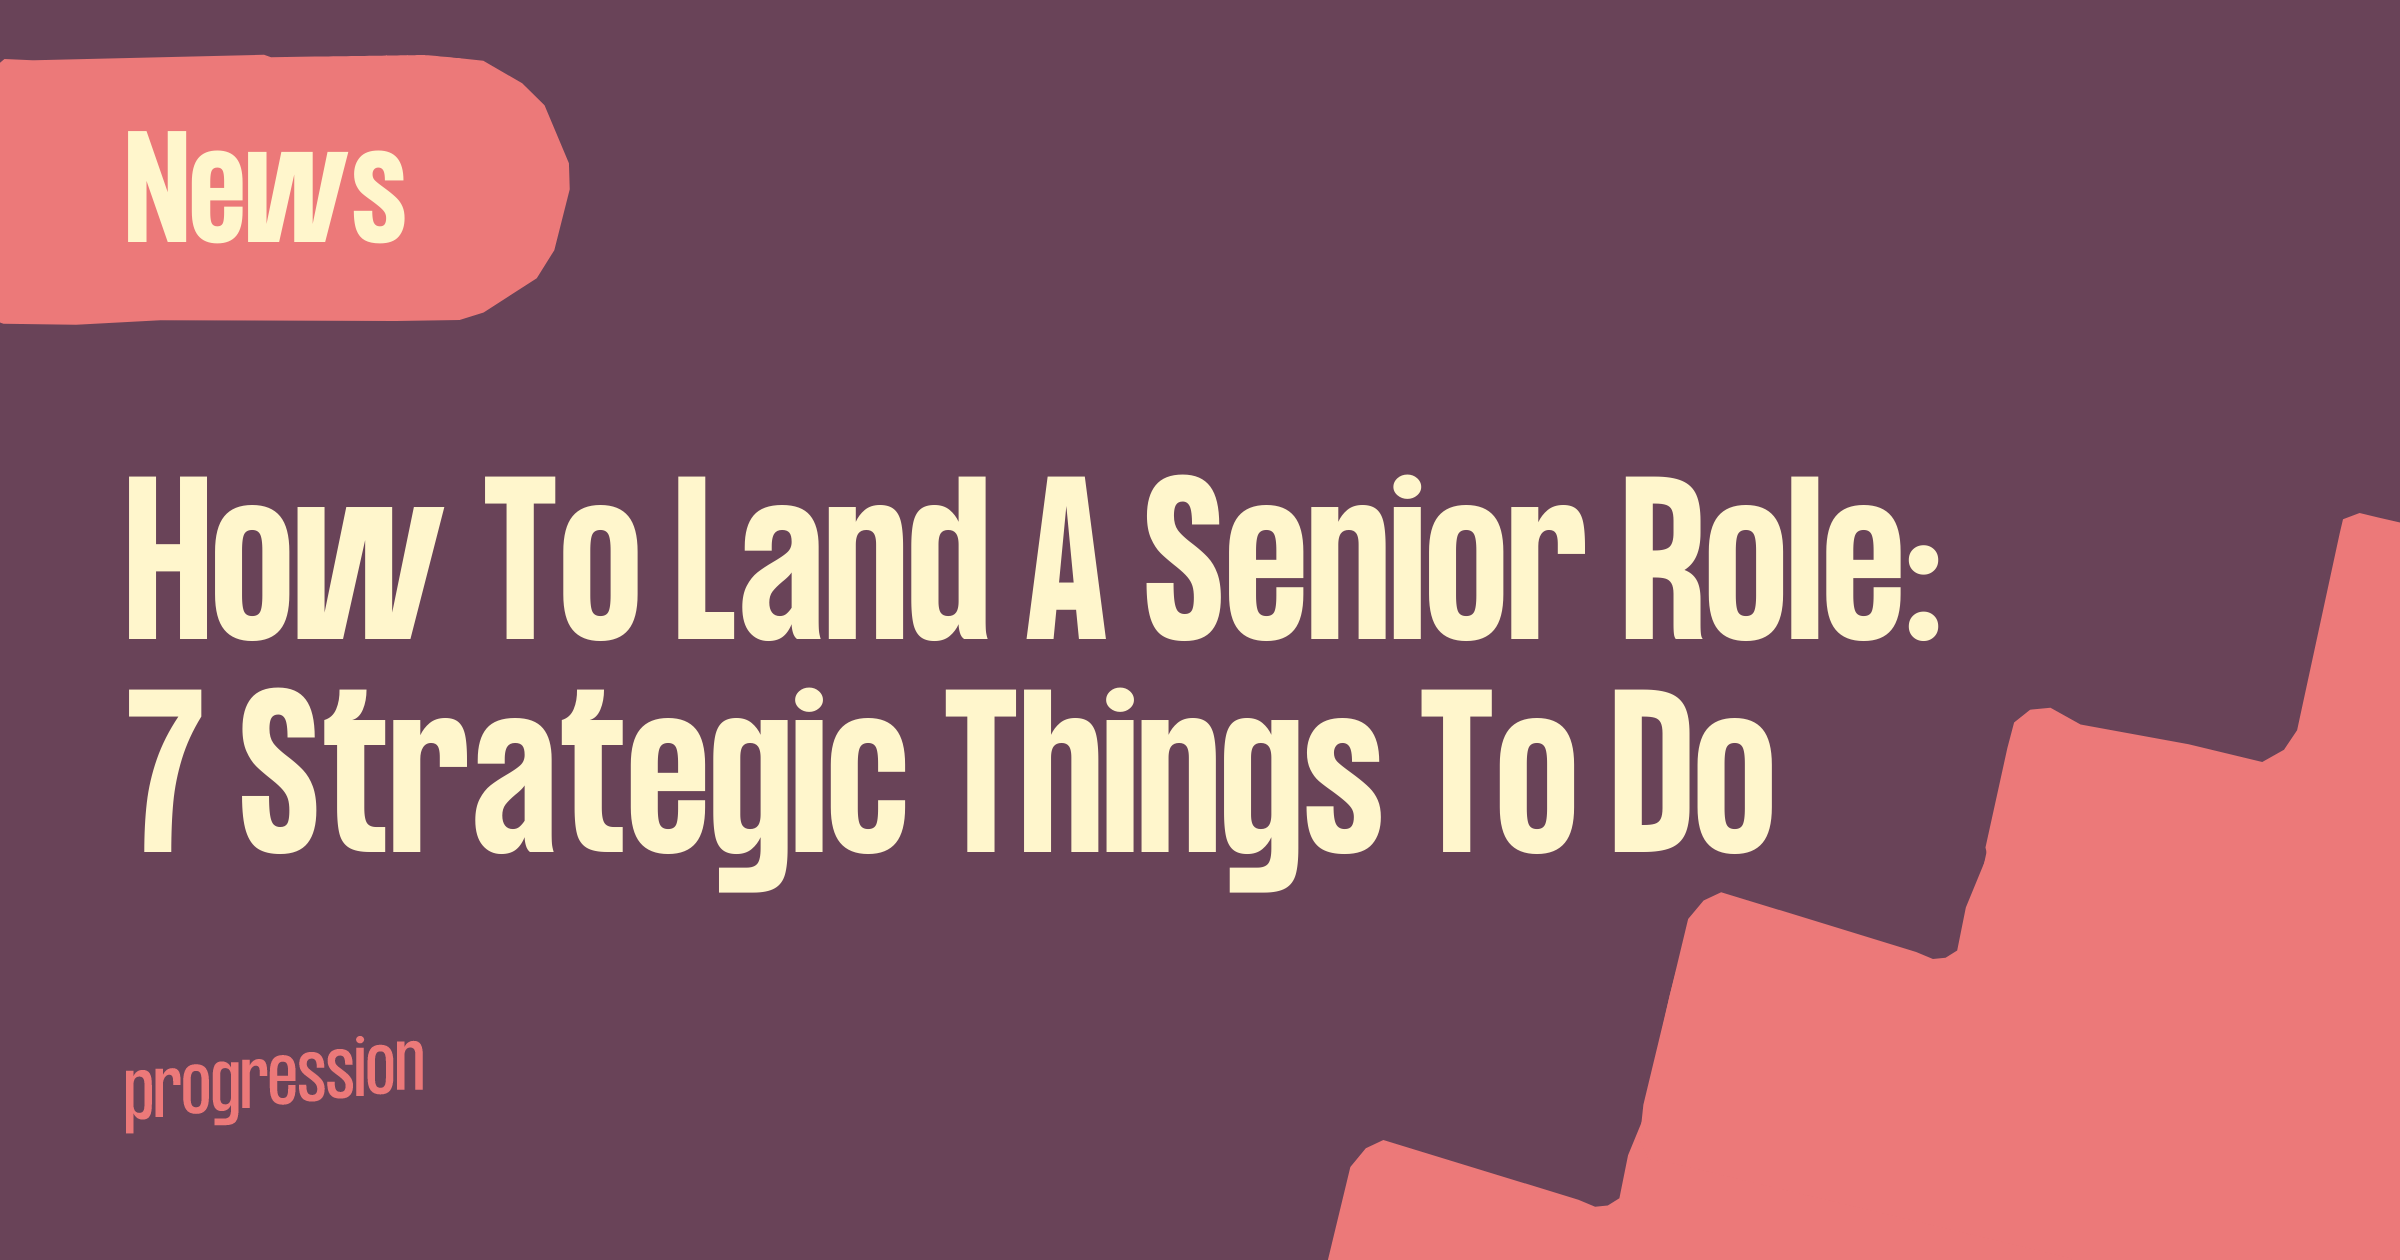 How to land a senior level role: 7 strategic things to do